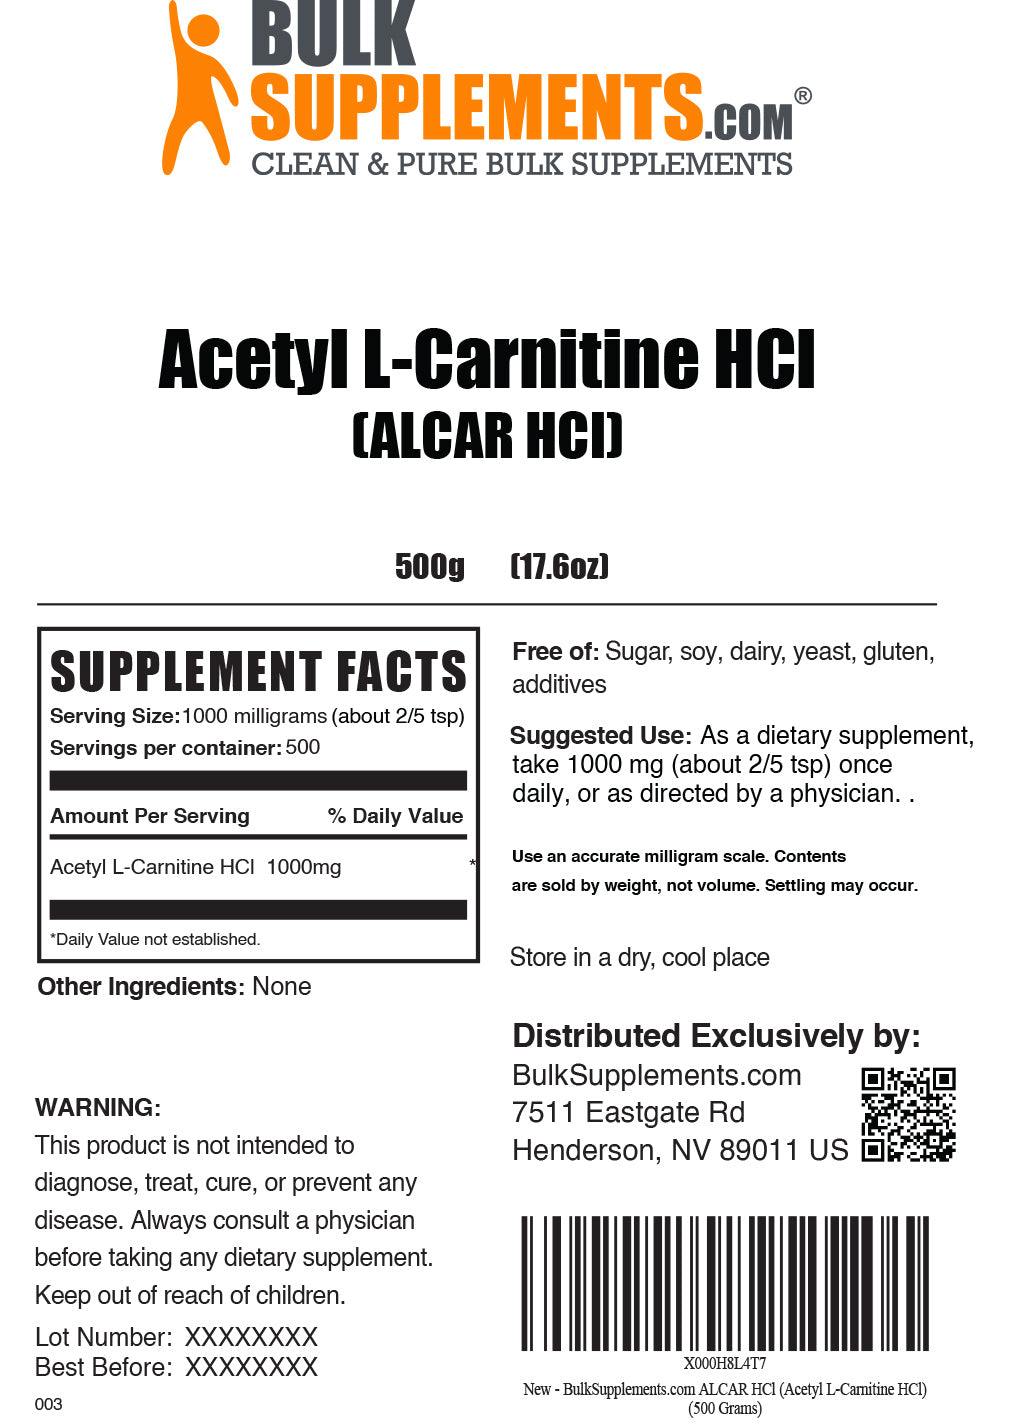 acetyl l-carnitine supplement facts